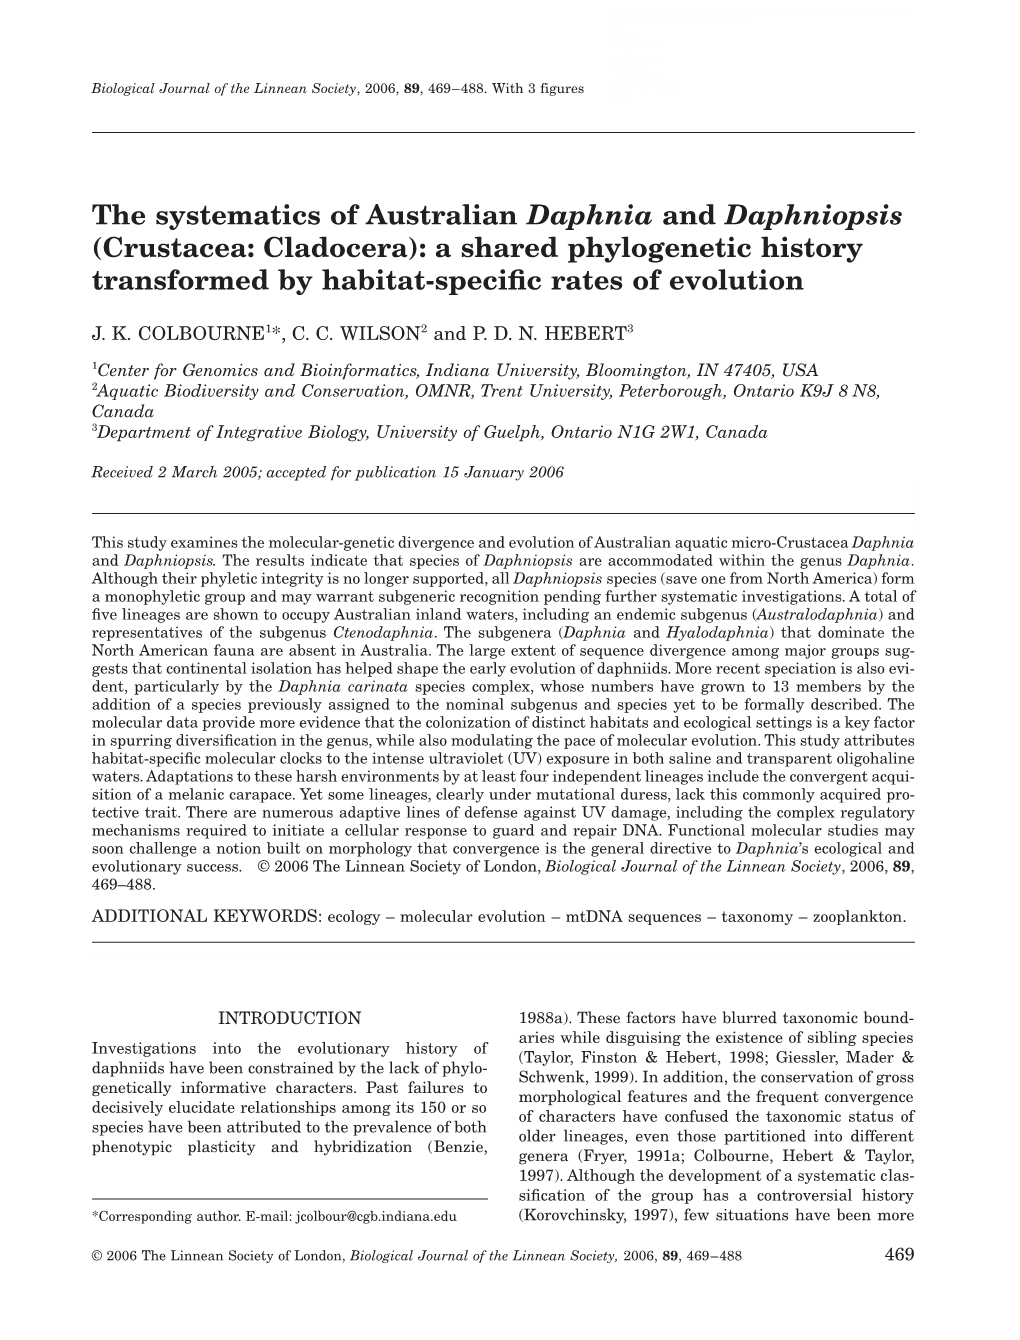 The Systematics of Australian Daphnia and Daphniopsis (Crustacea: Cladocera): a Shared Phylogenetic History Transformed by Habitat-Speciﬁc Rates of Evolution